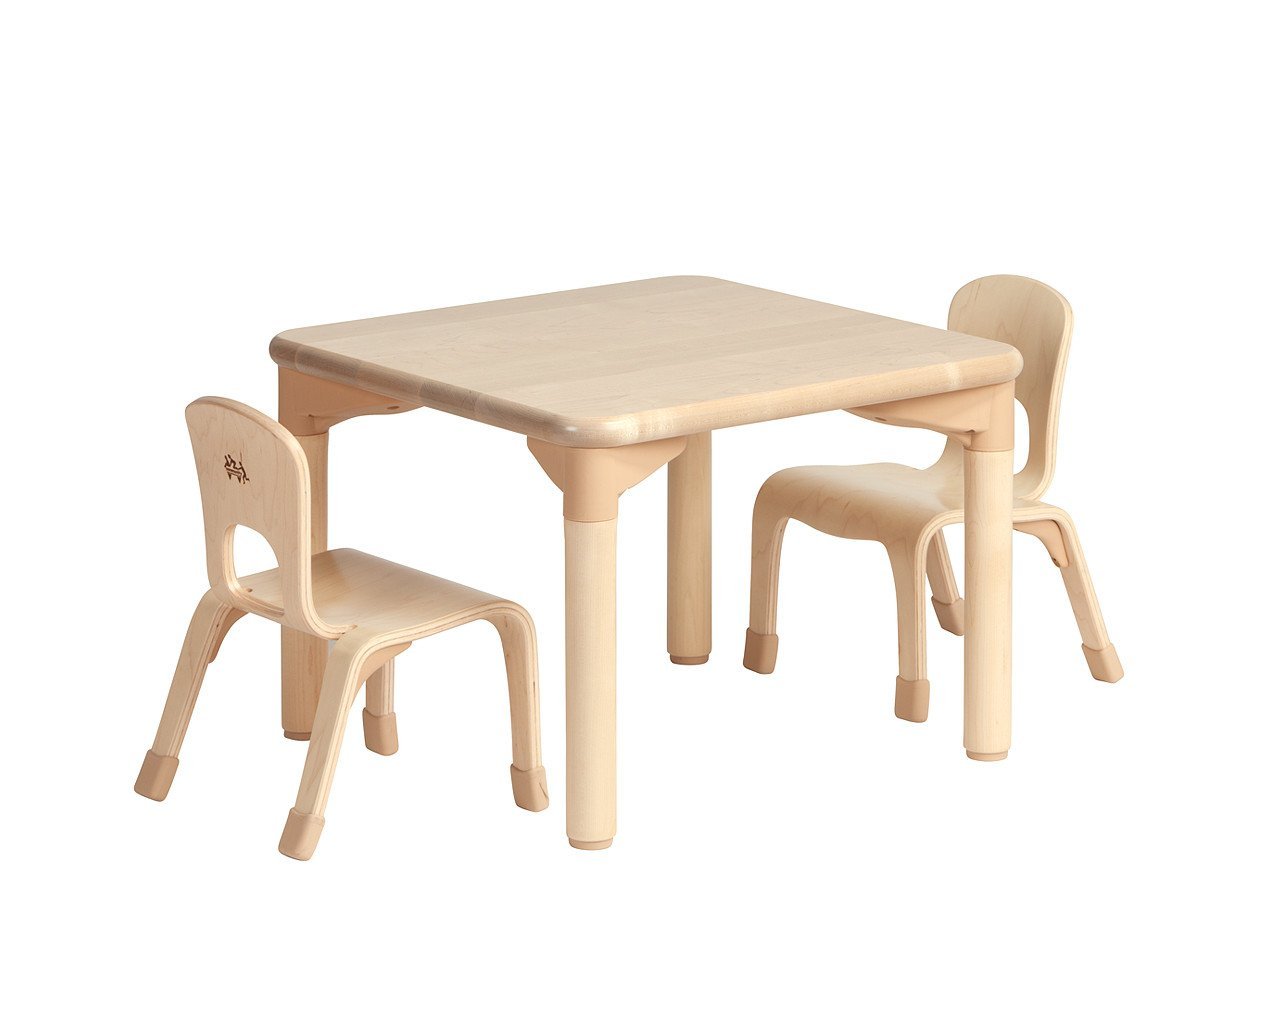 Community Playthings Square Woodcrest Table 16" and Two Chairs 8" - louisekool